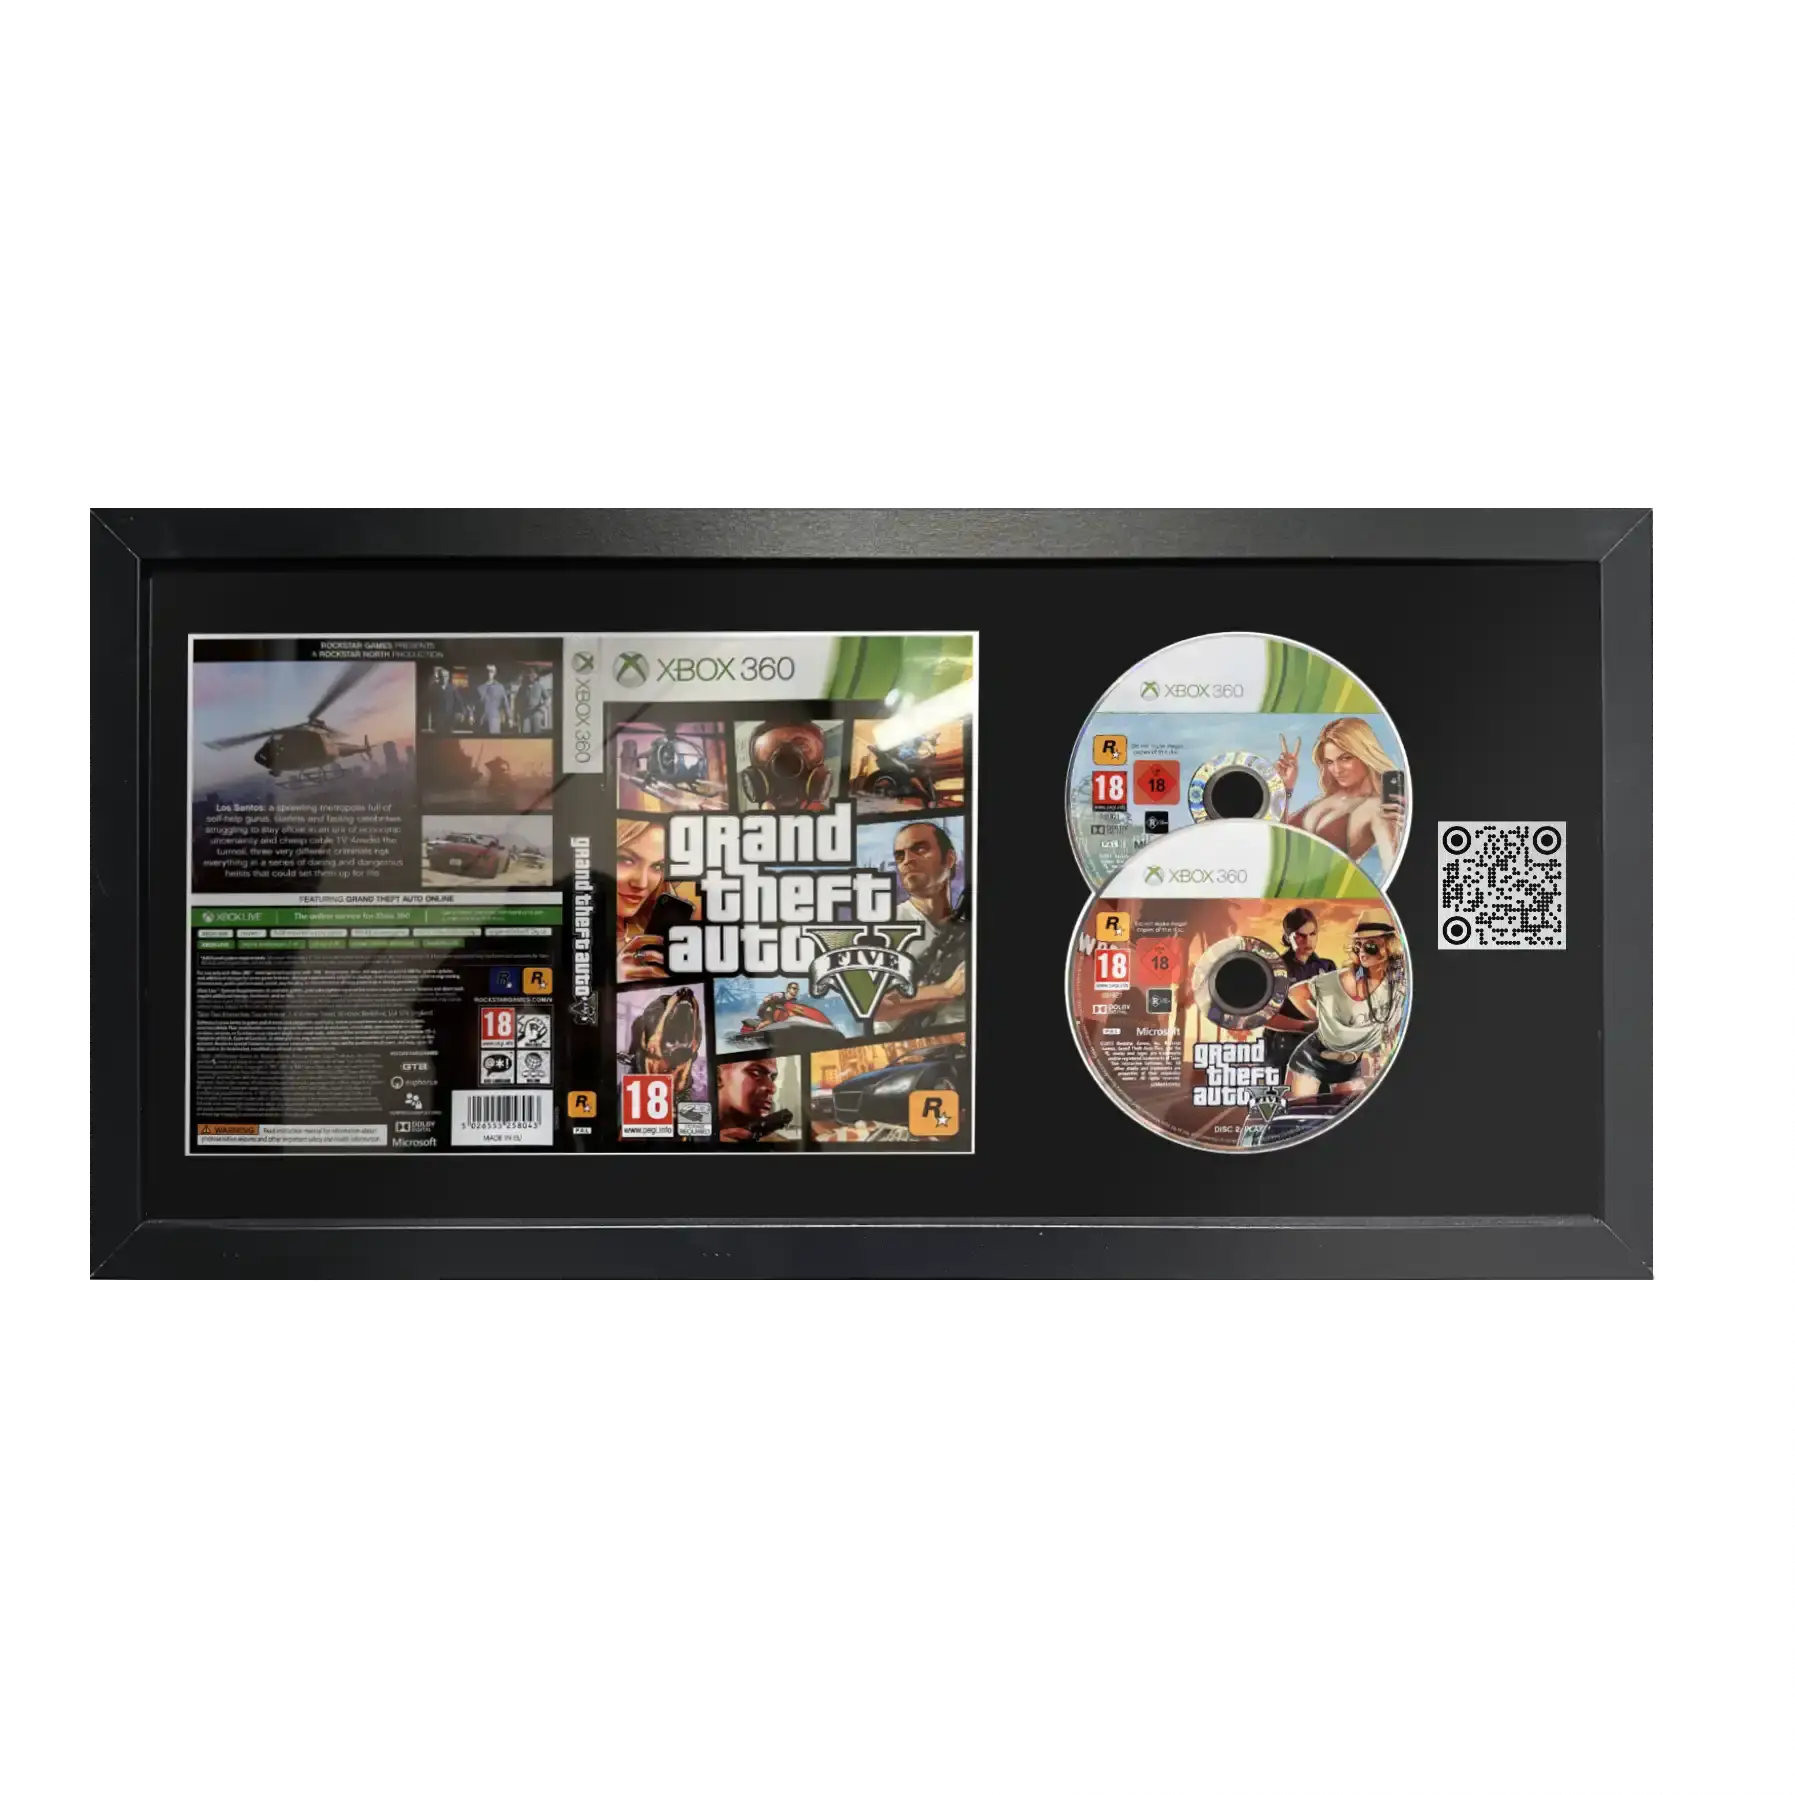 Grand theft auto 5 game on Xbox 360 in a frame with a QR code